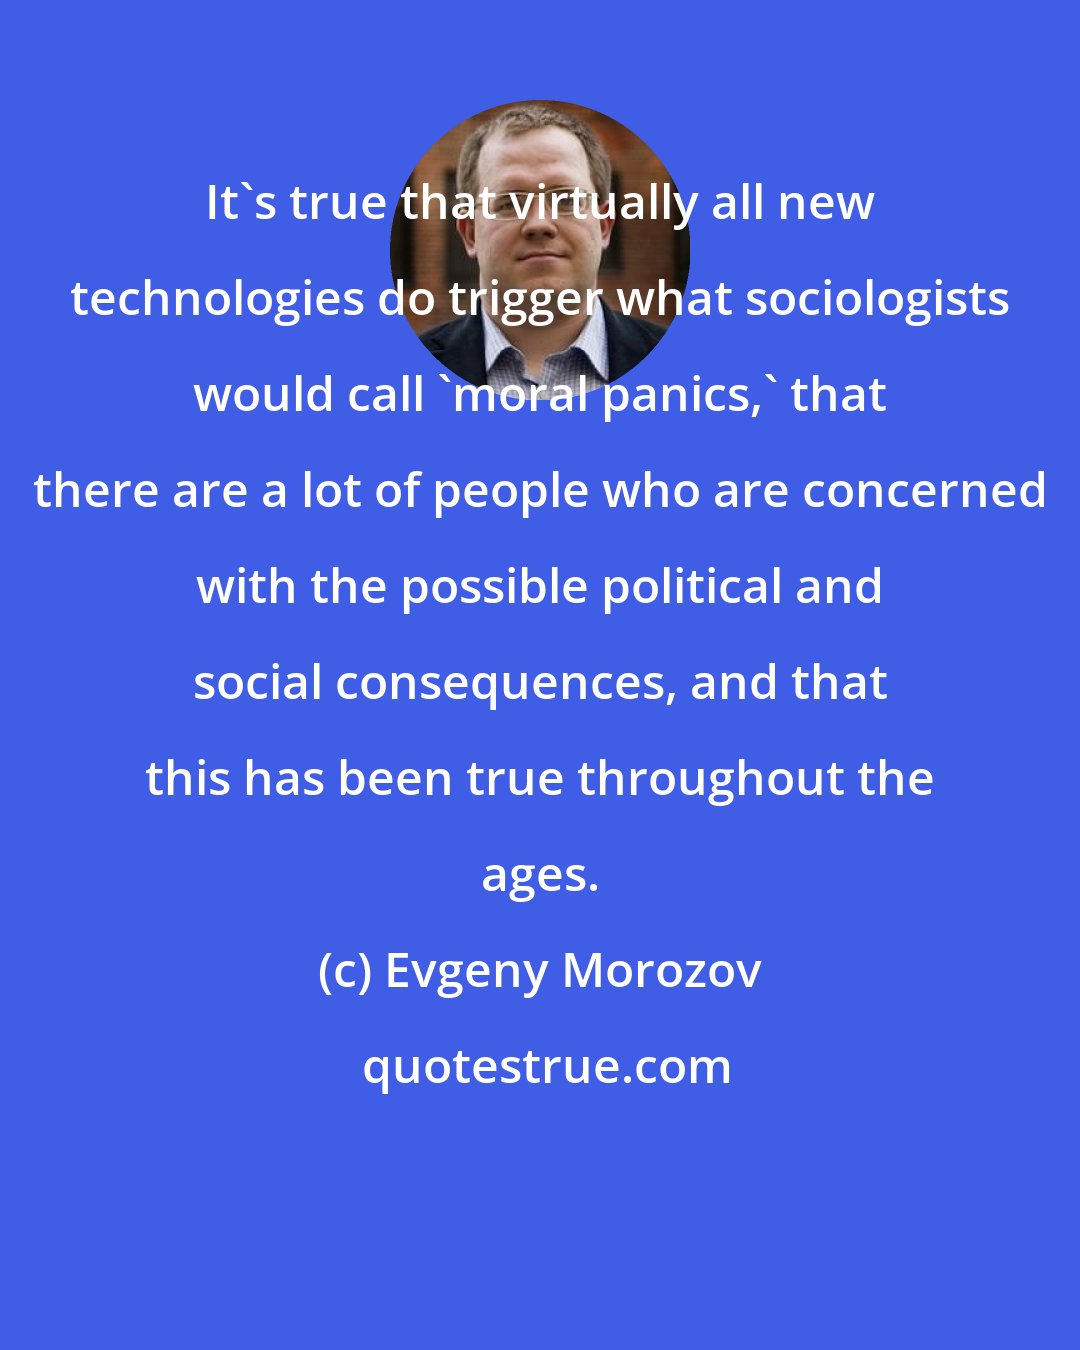 Evgeny Morozov: It's true that virtually all new technologies do trigger what sociologists would call 'moral panics,' that there are a lot of people who are concerned with the possible political and social consequences, and that this has been true throughout the ages.